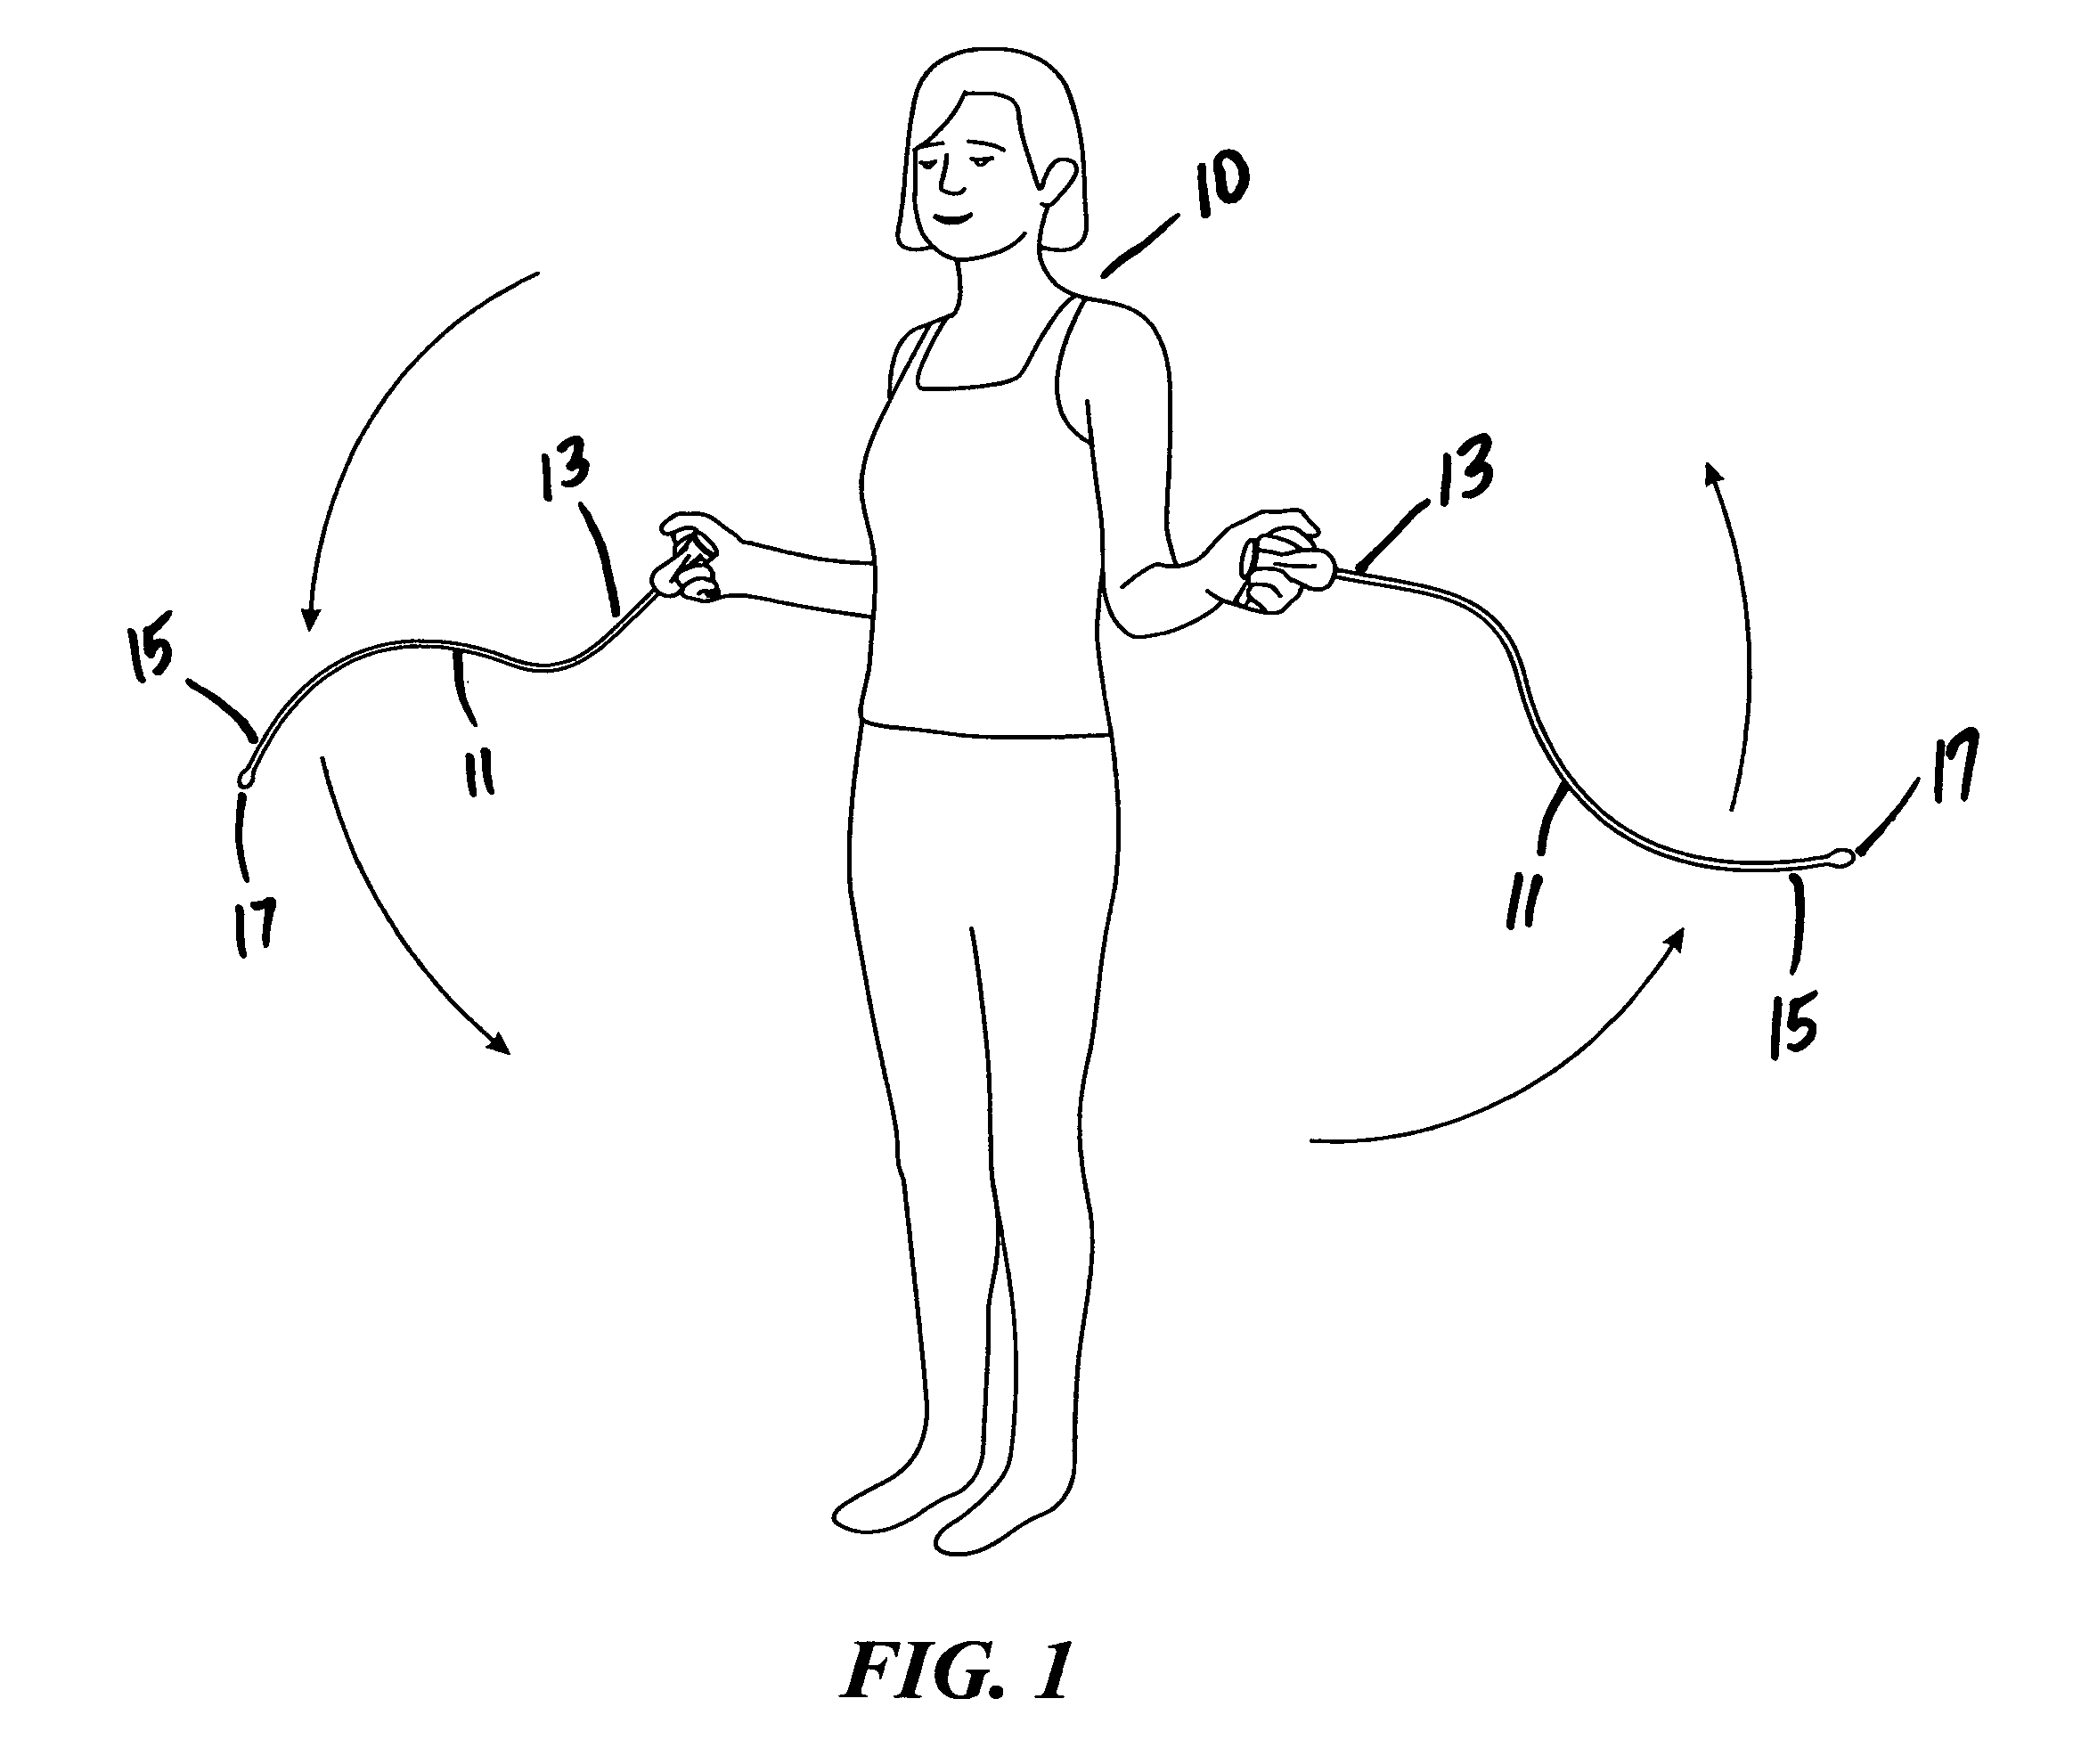 Exercise device and method of jump rope exercise using two separate ropes